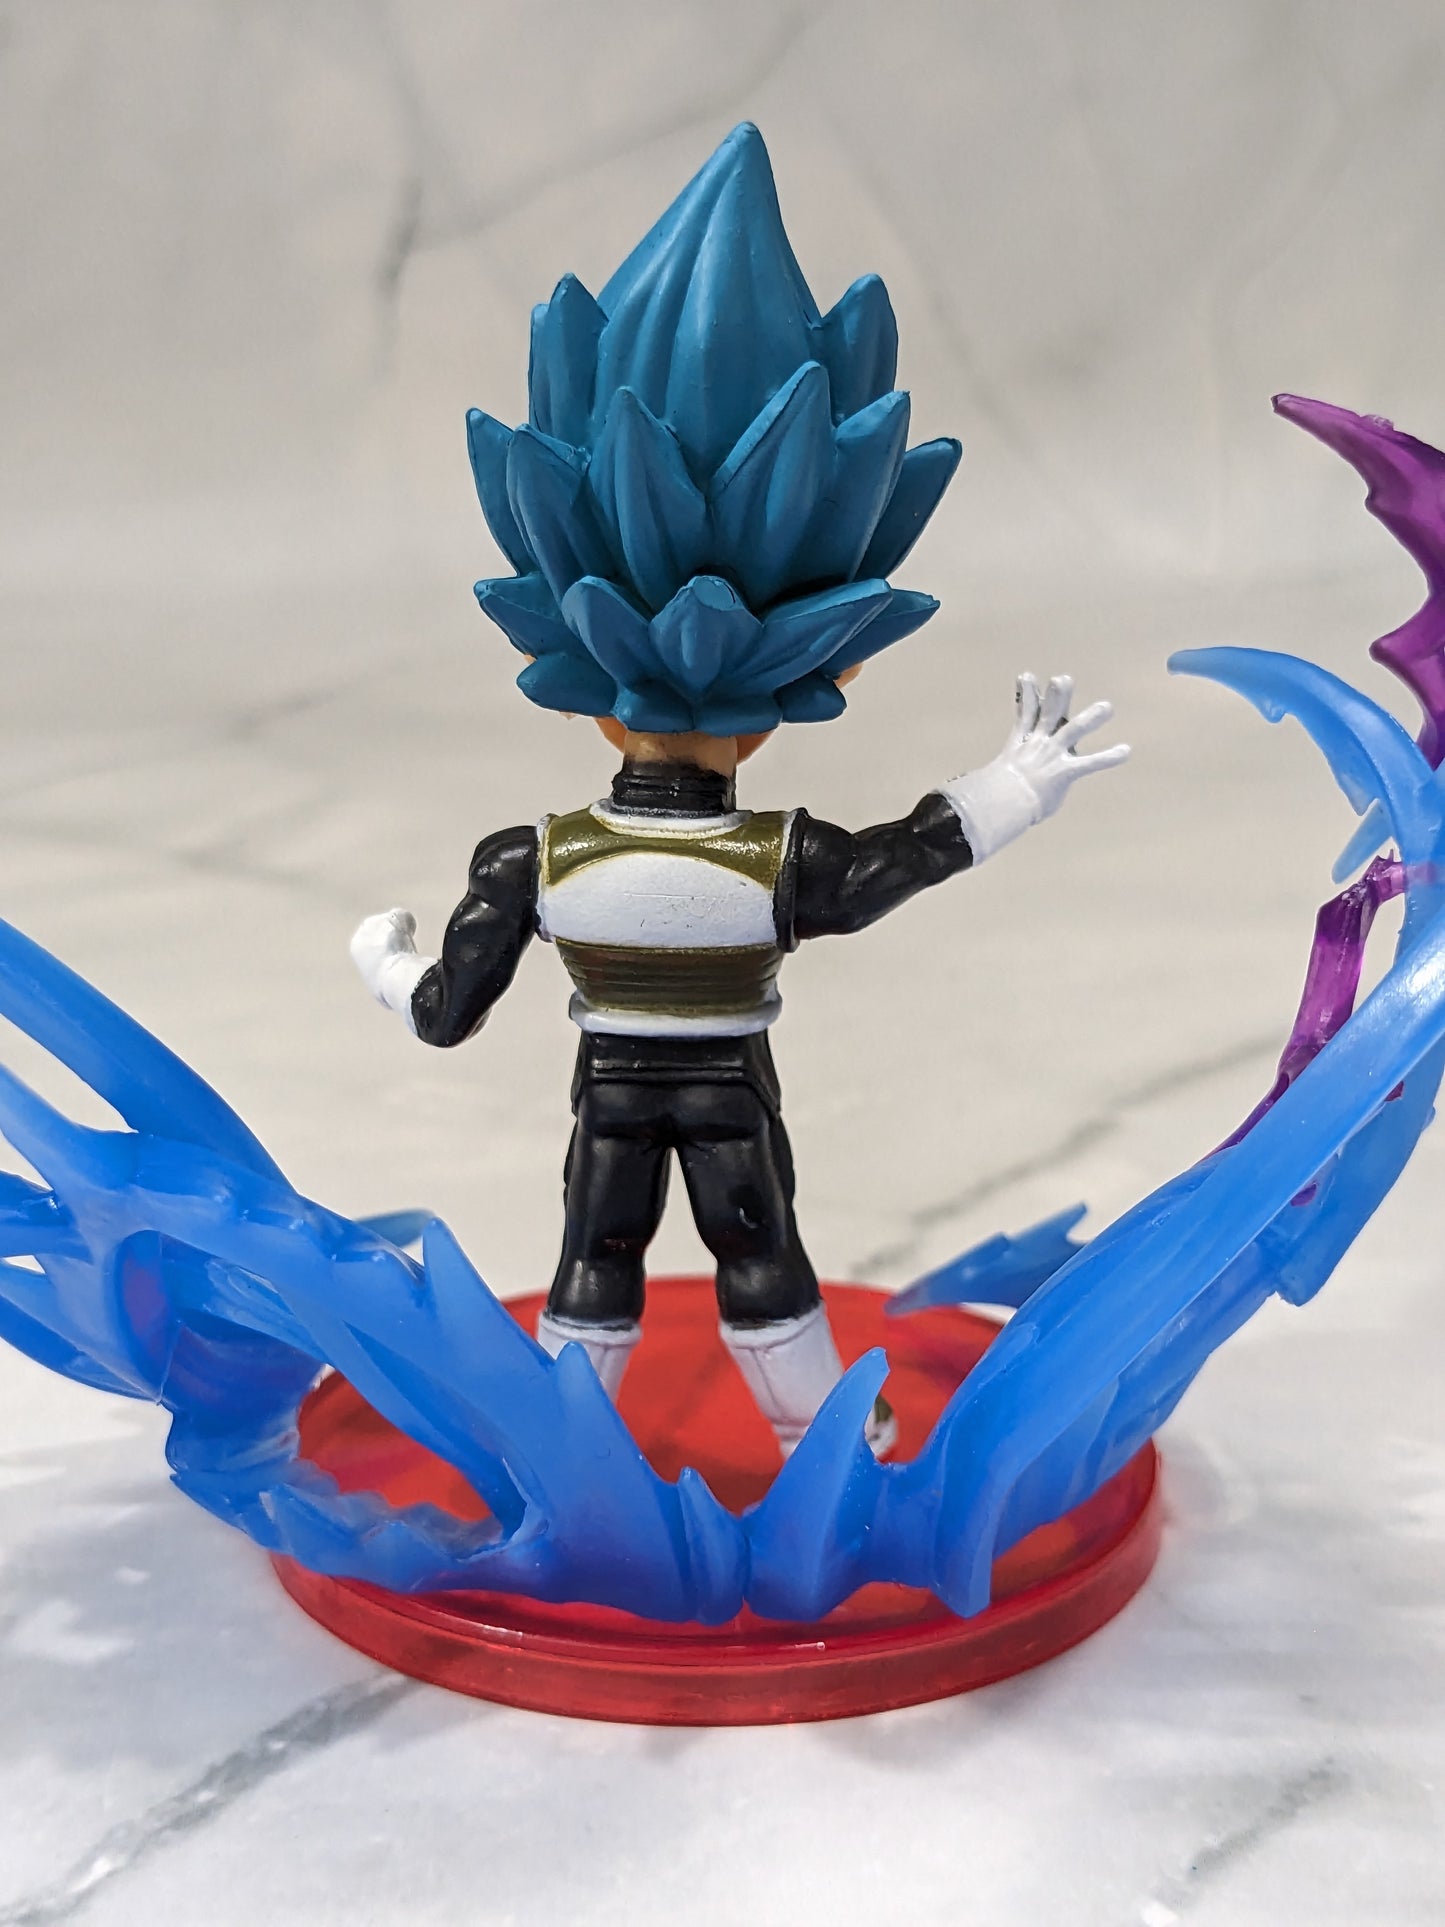 Dragon BallZ 8.5 cm Vegeta Super Saiyan God- Blue, Energy Effect Action Figure with Cute Display Stand, Best Anime Collectible for DBZ Fans